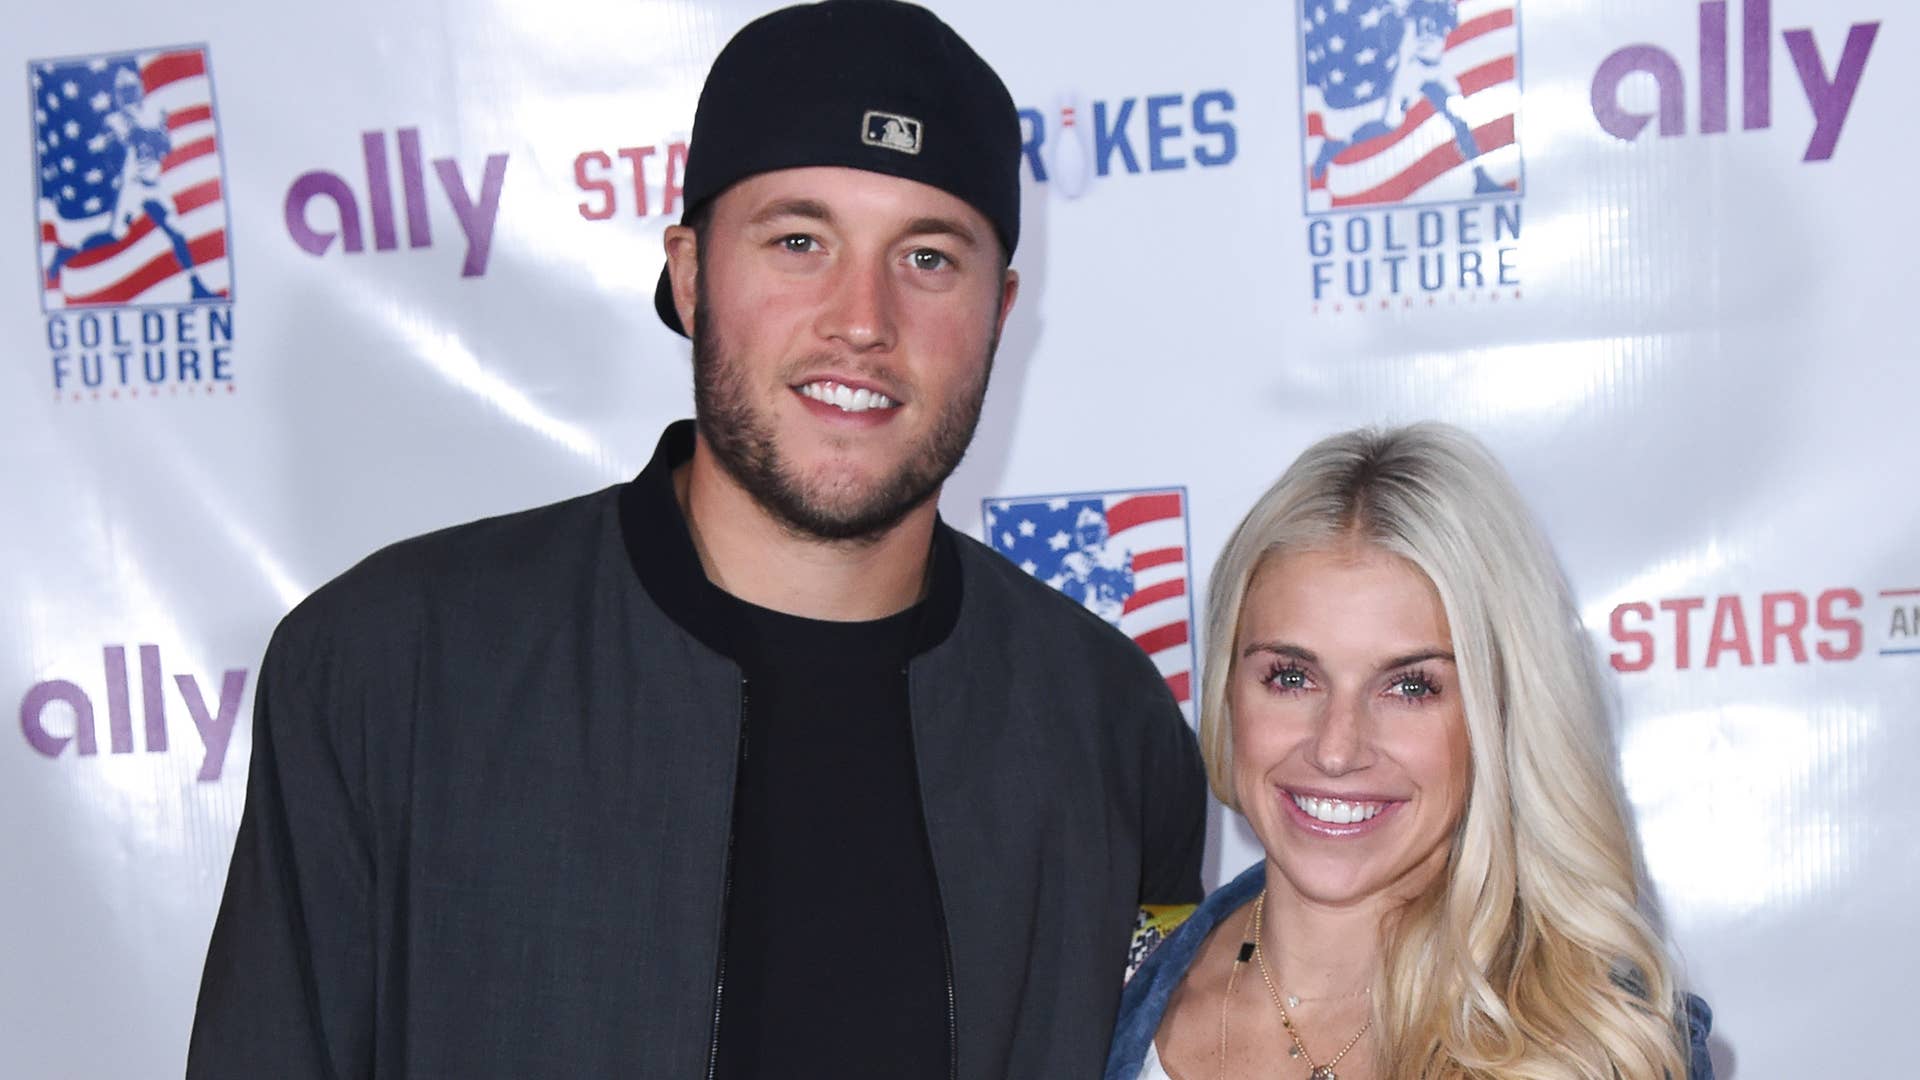 Matthew Stafford and his wife Kelly at a bowling event in 2017